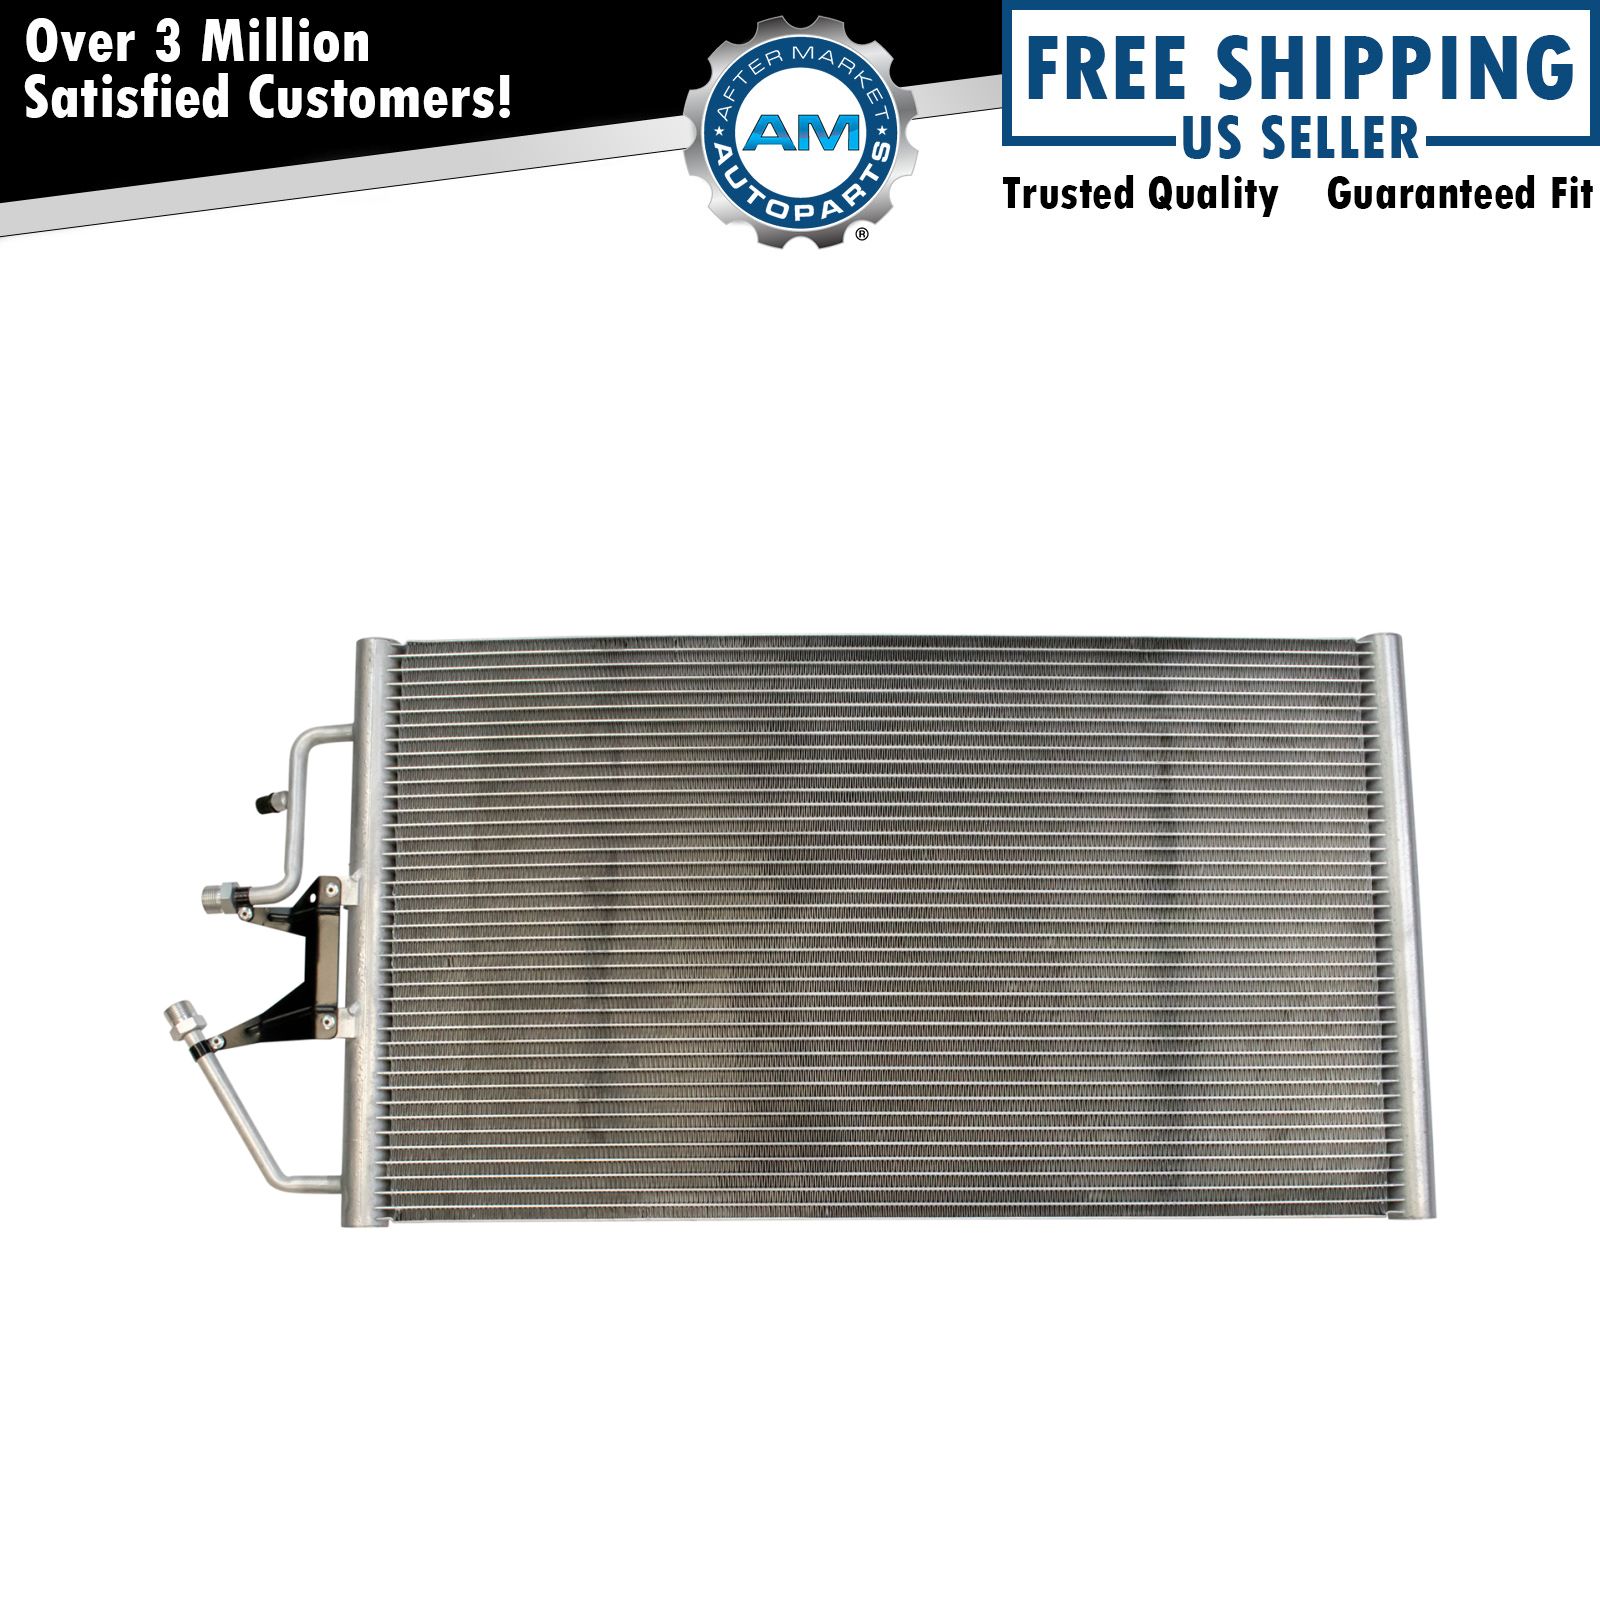 AC Condenser A/C Air Conditioning for Chevrolet GMC Truck SUV Pickup New